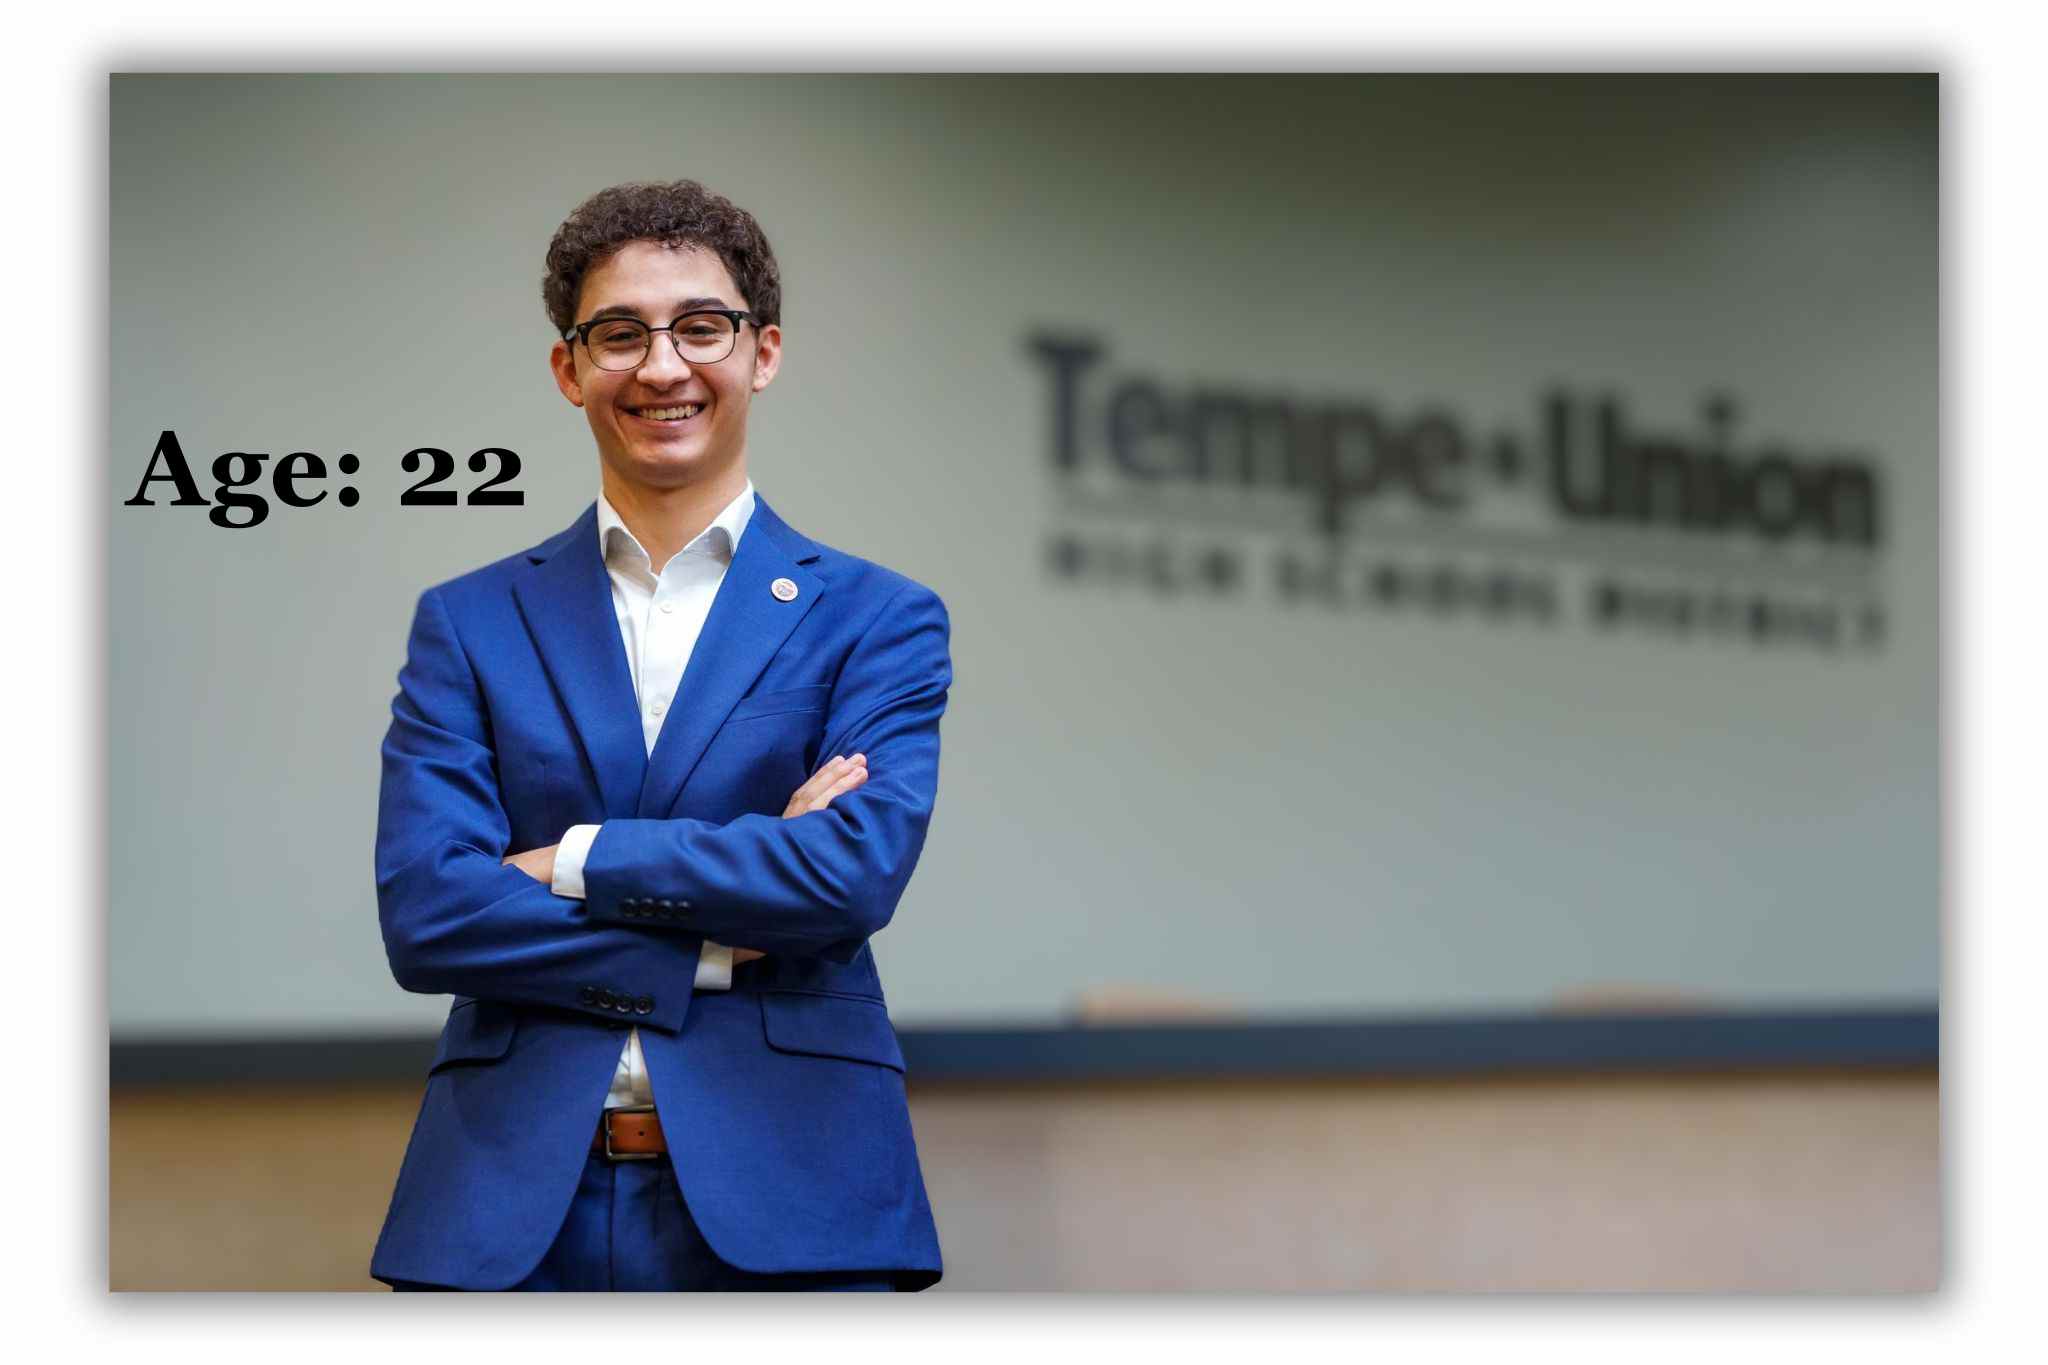 Armando Montero: A 22-year-old Leading the role of school board president in one of the largest school districts in Arizona,USA: the Tempe Union High School District.